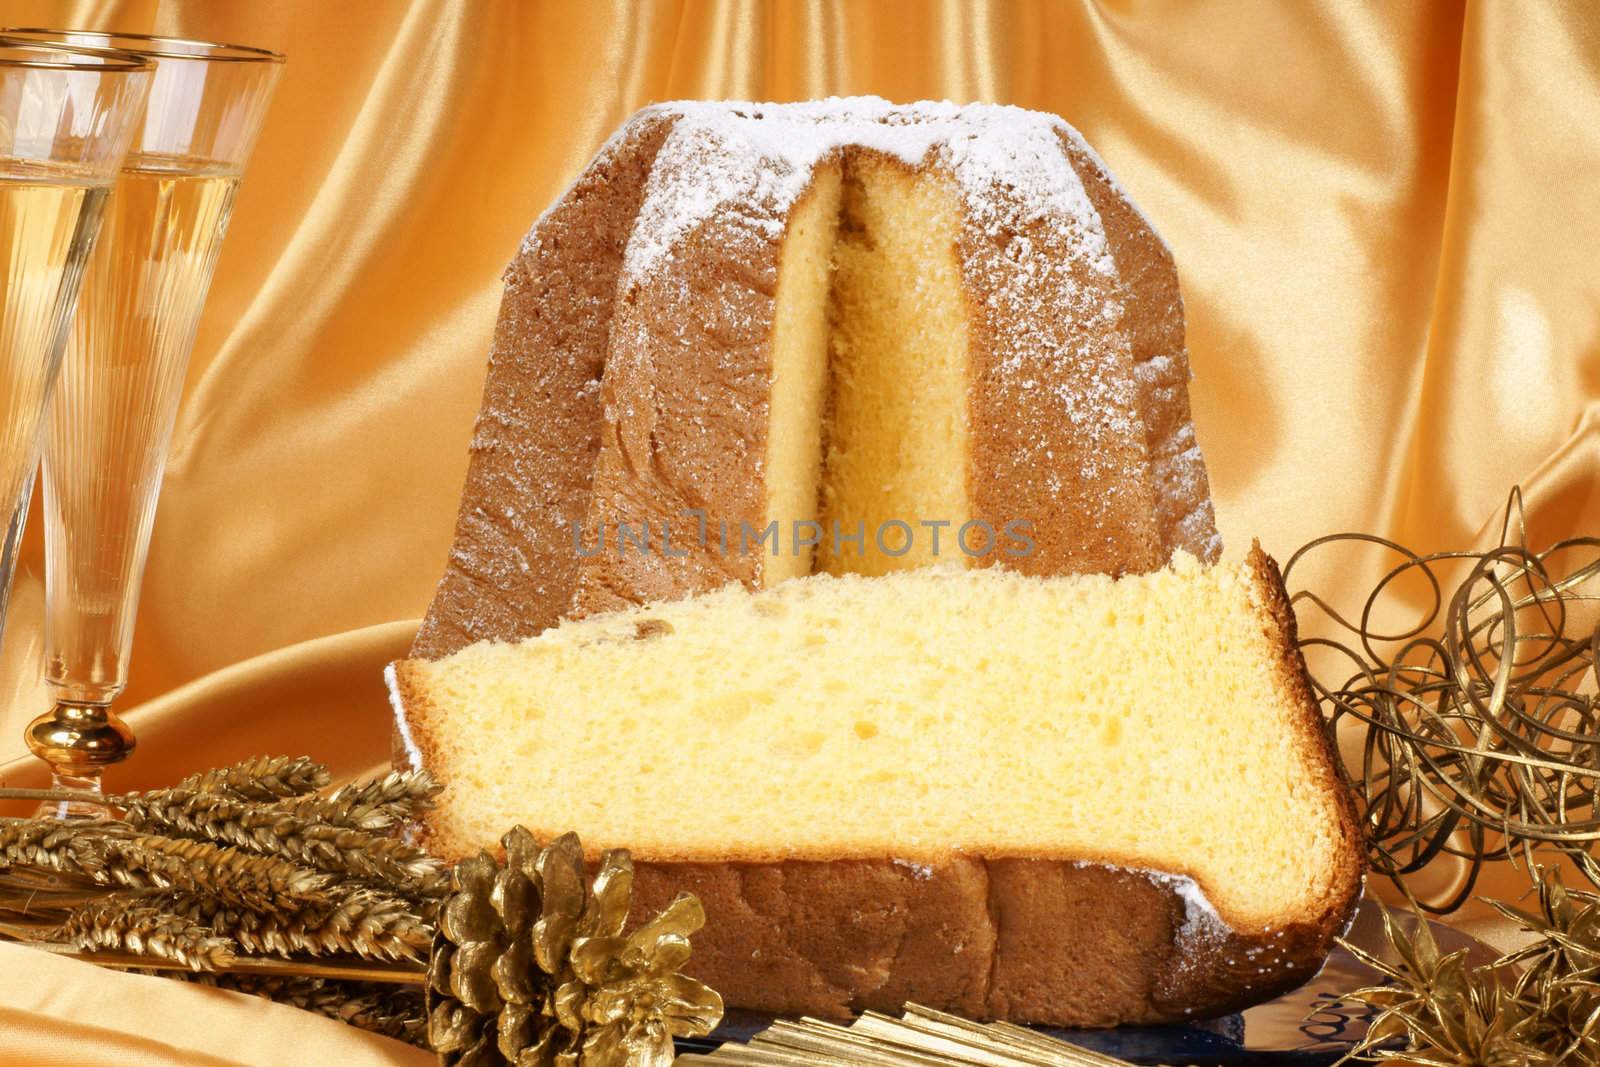 Christmas composition with Pandoro the golden cake of Verona, two glasses of spumante and some ornaments over a yellow background